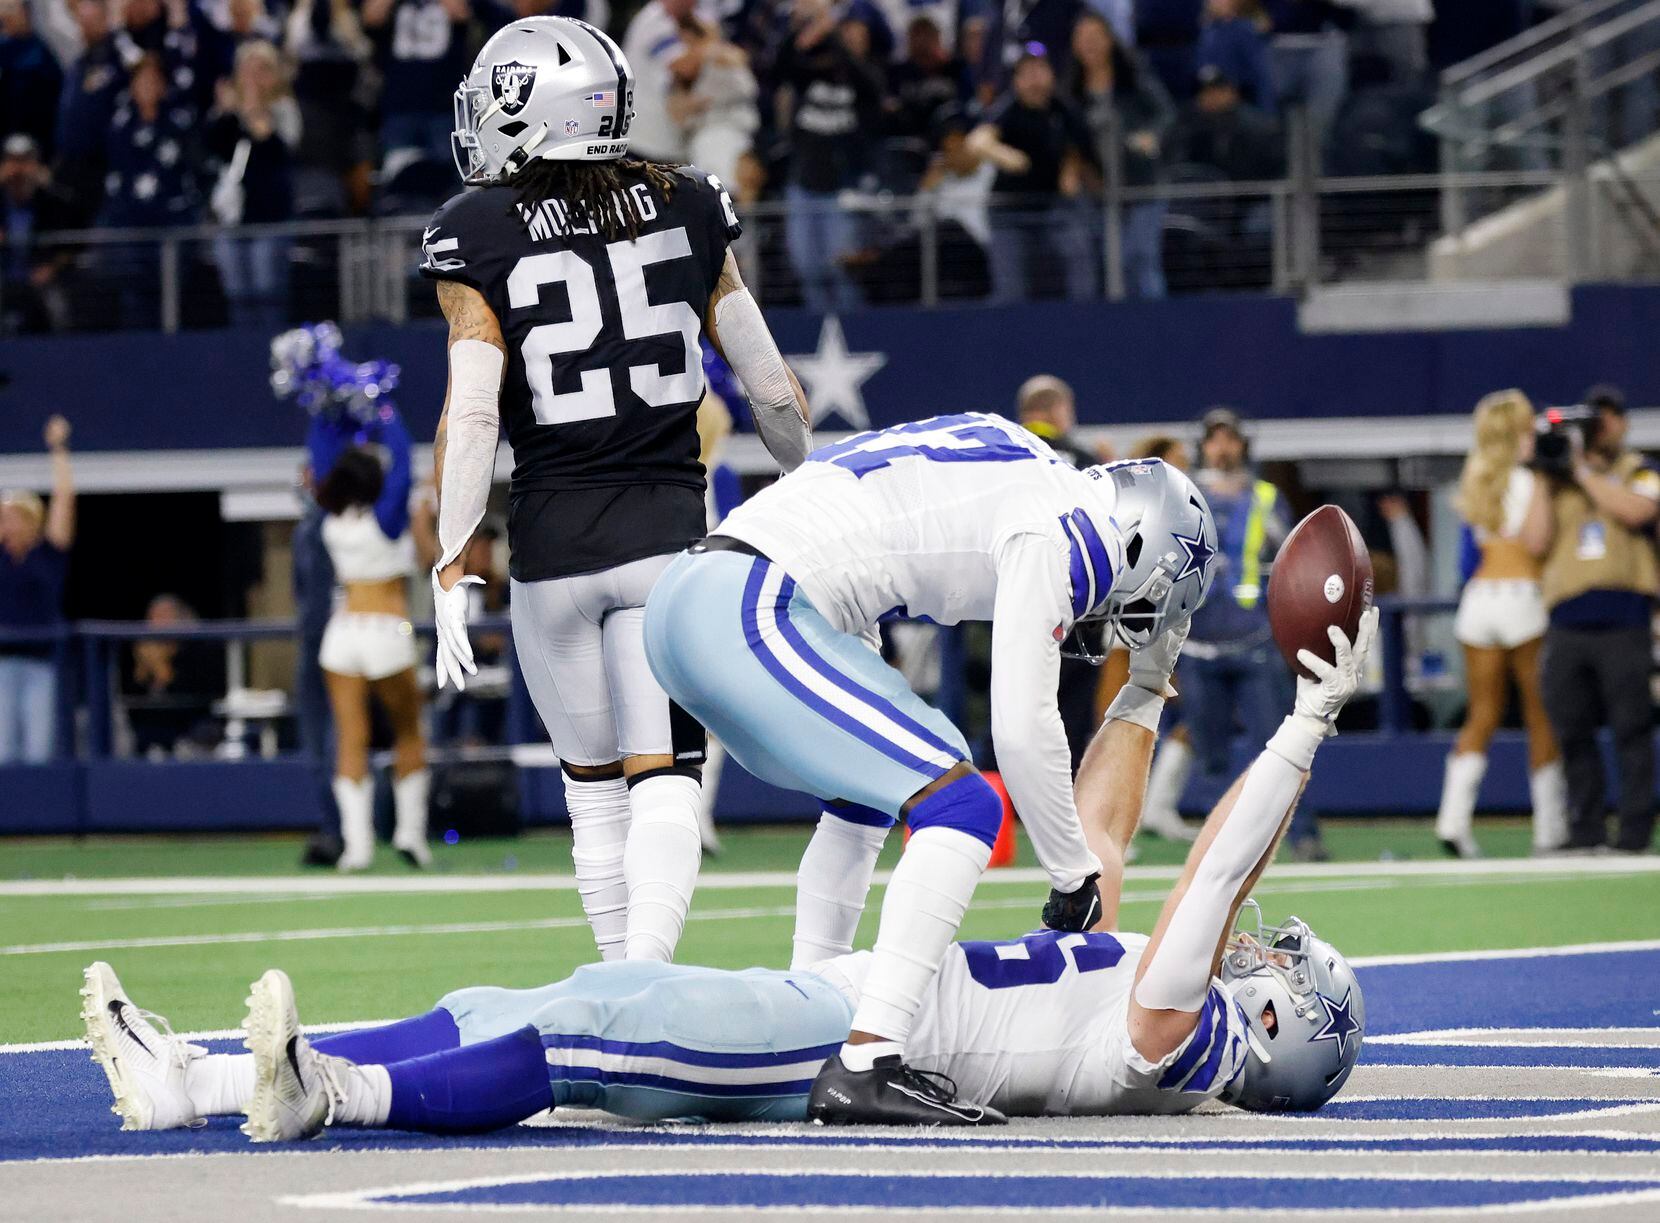 Dallas Cowboys tight end Dalton Schultz (86) is congratulated on his fourth quarter touchdown by teammate Jayron Kearse (27) at AT&T Stadium in Arlington, November 25, 2021. The Cowboys went for two but eventually lost in overtime to the Las Vegas Raiders, 36-33. (Tom Fox/The Dallas Morning News)